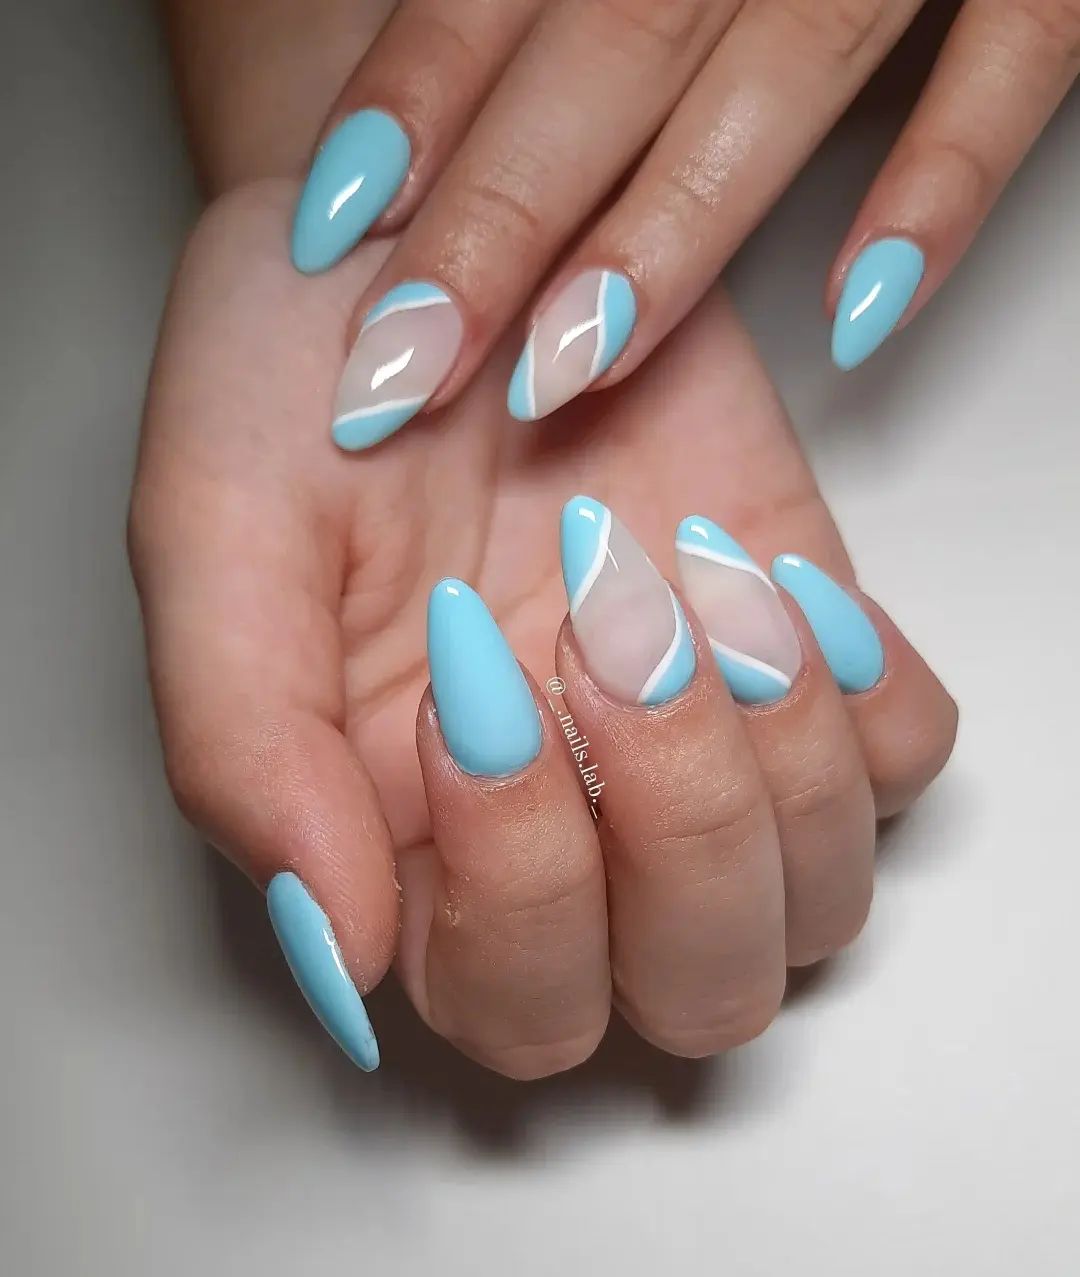 As accent nails, you can use a transparent base and draw some random lines of white and light blue colors. Long almond nails go with this nail design, too.